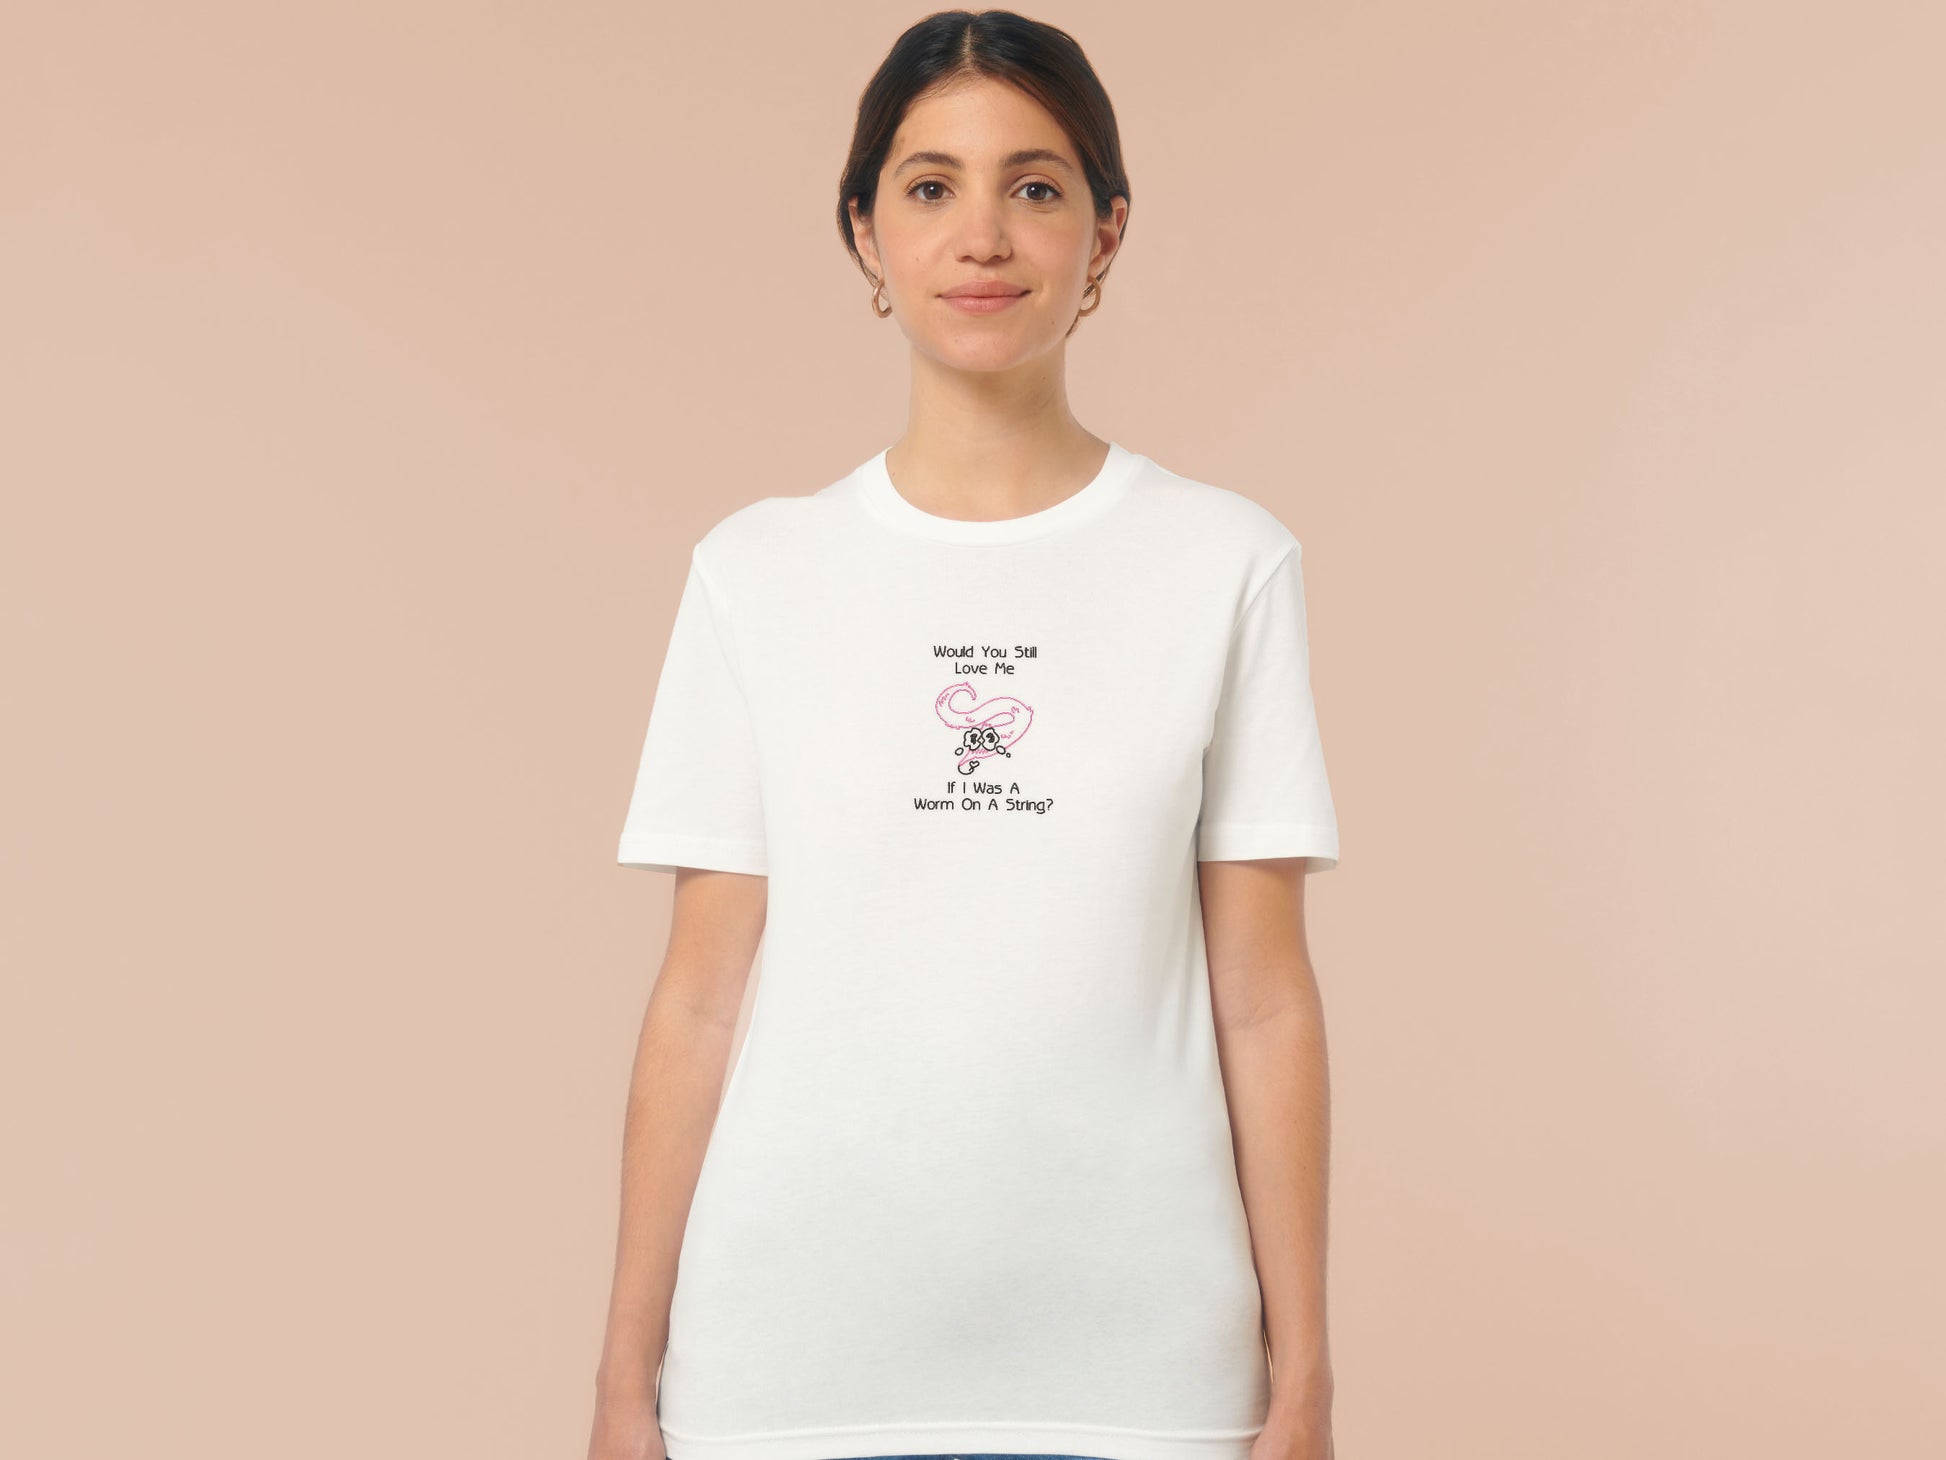 A woman wearing an off white short sleeved crew neck t-shirt with an embroidered design of a pink worm on a string with a cute face crying with the black text Would You Still Love Me If I Was A Worm On A String